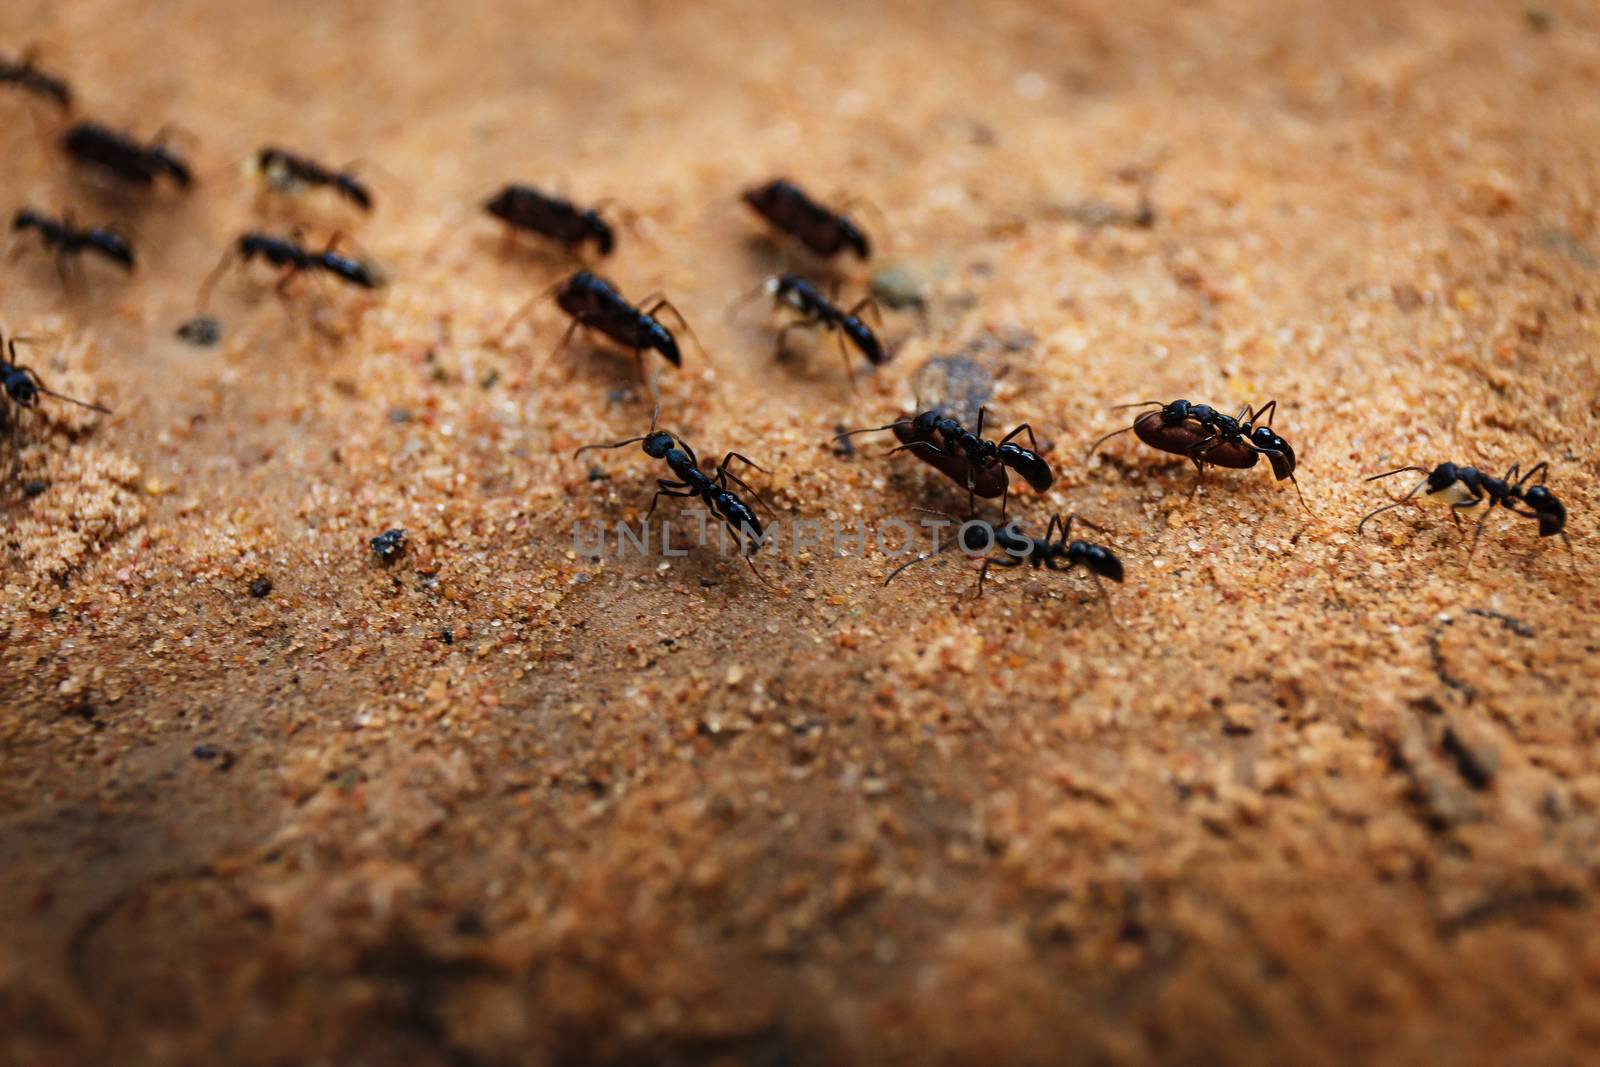 Marching swarm of ants by gorov108